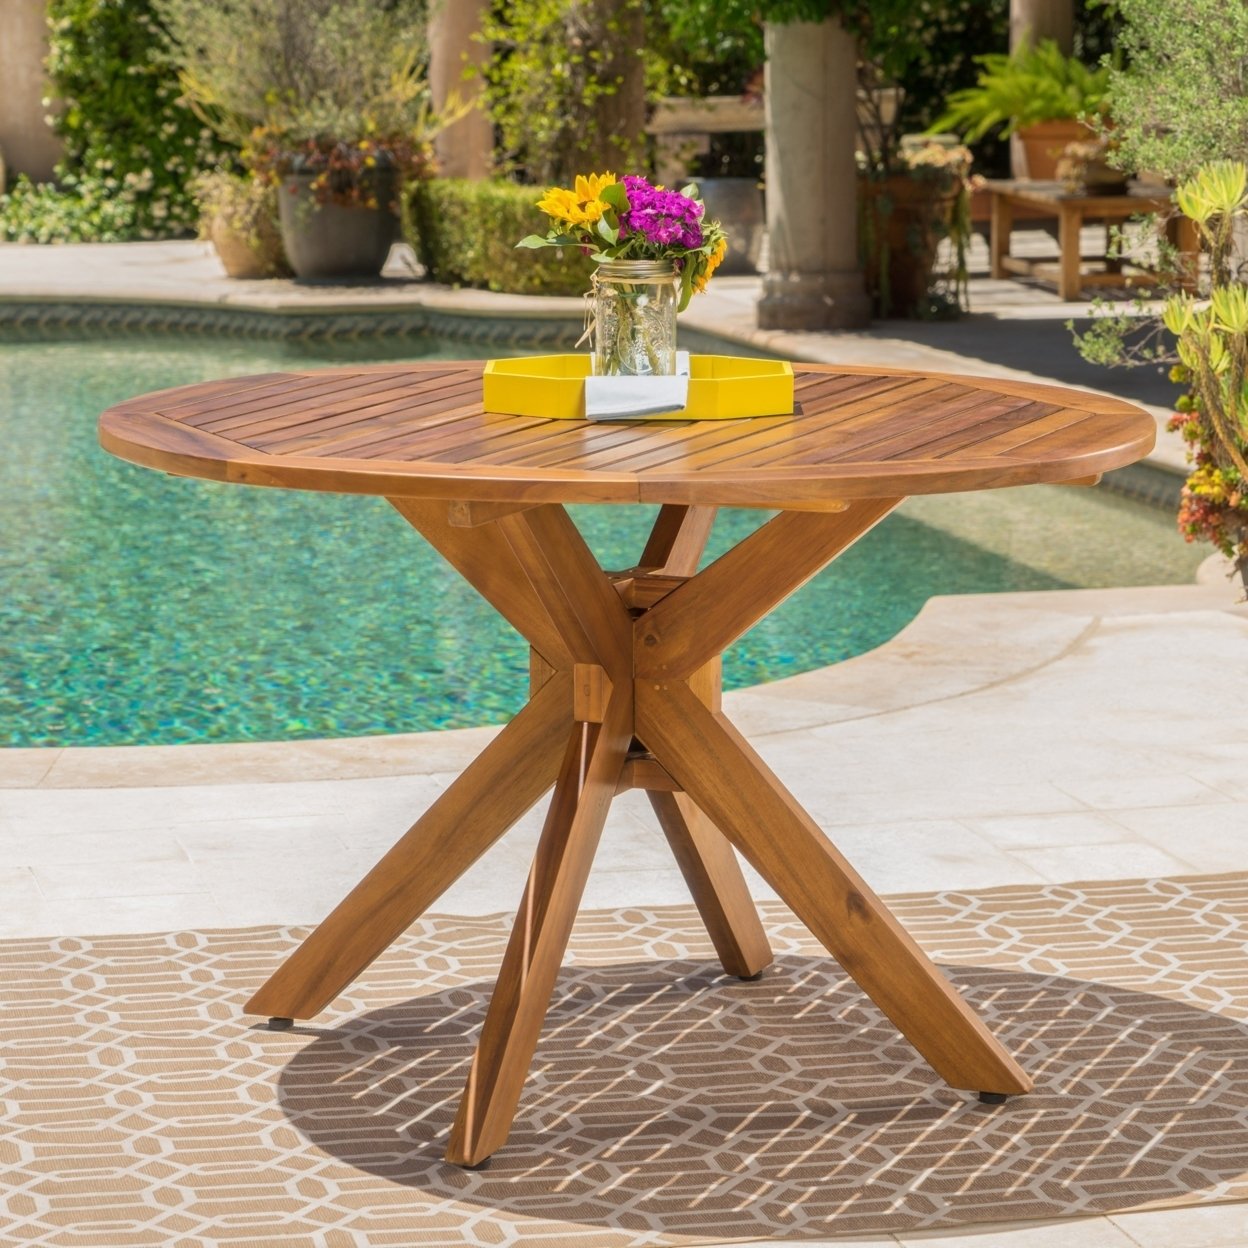 Buy Stanford Outdoor Acacia Wood Round Dining Table by GDFStudio on Dot